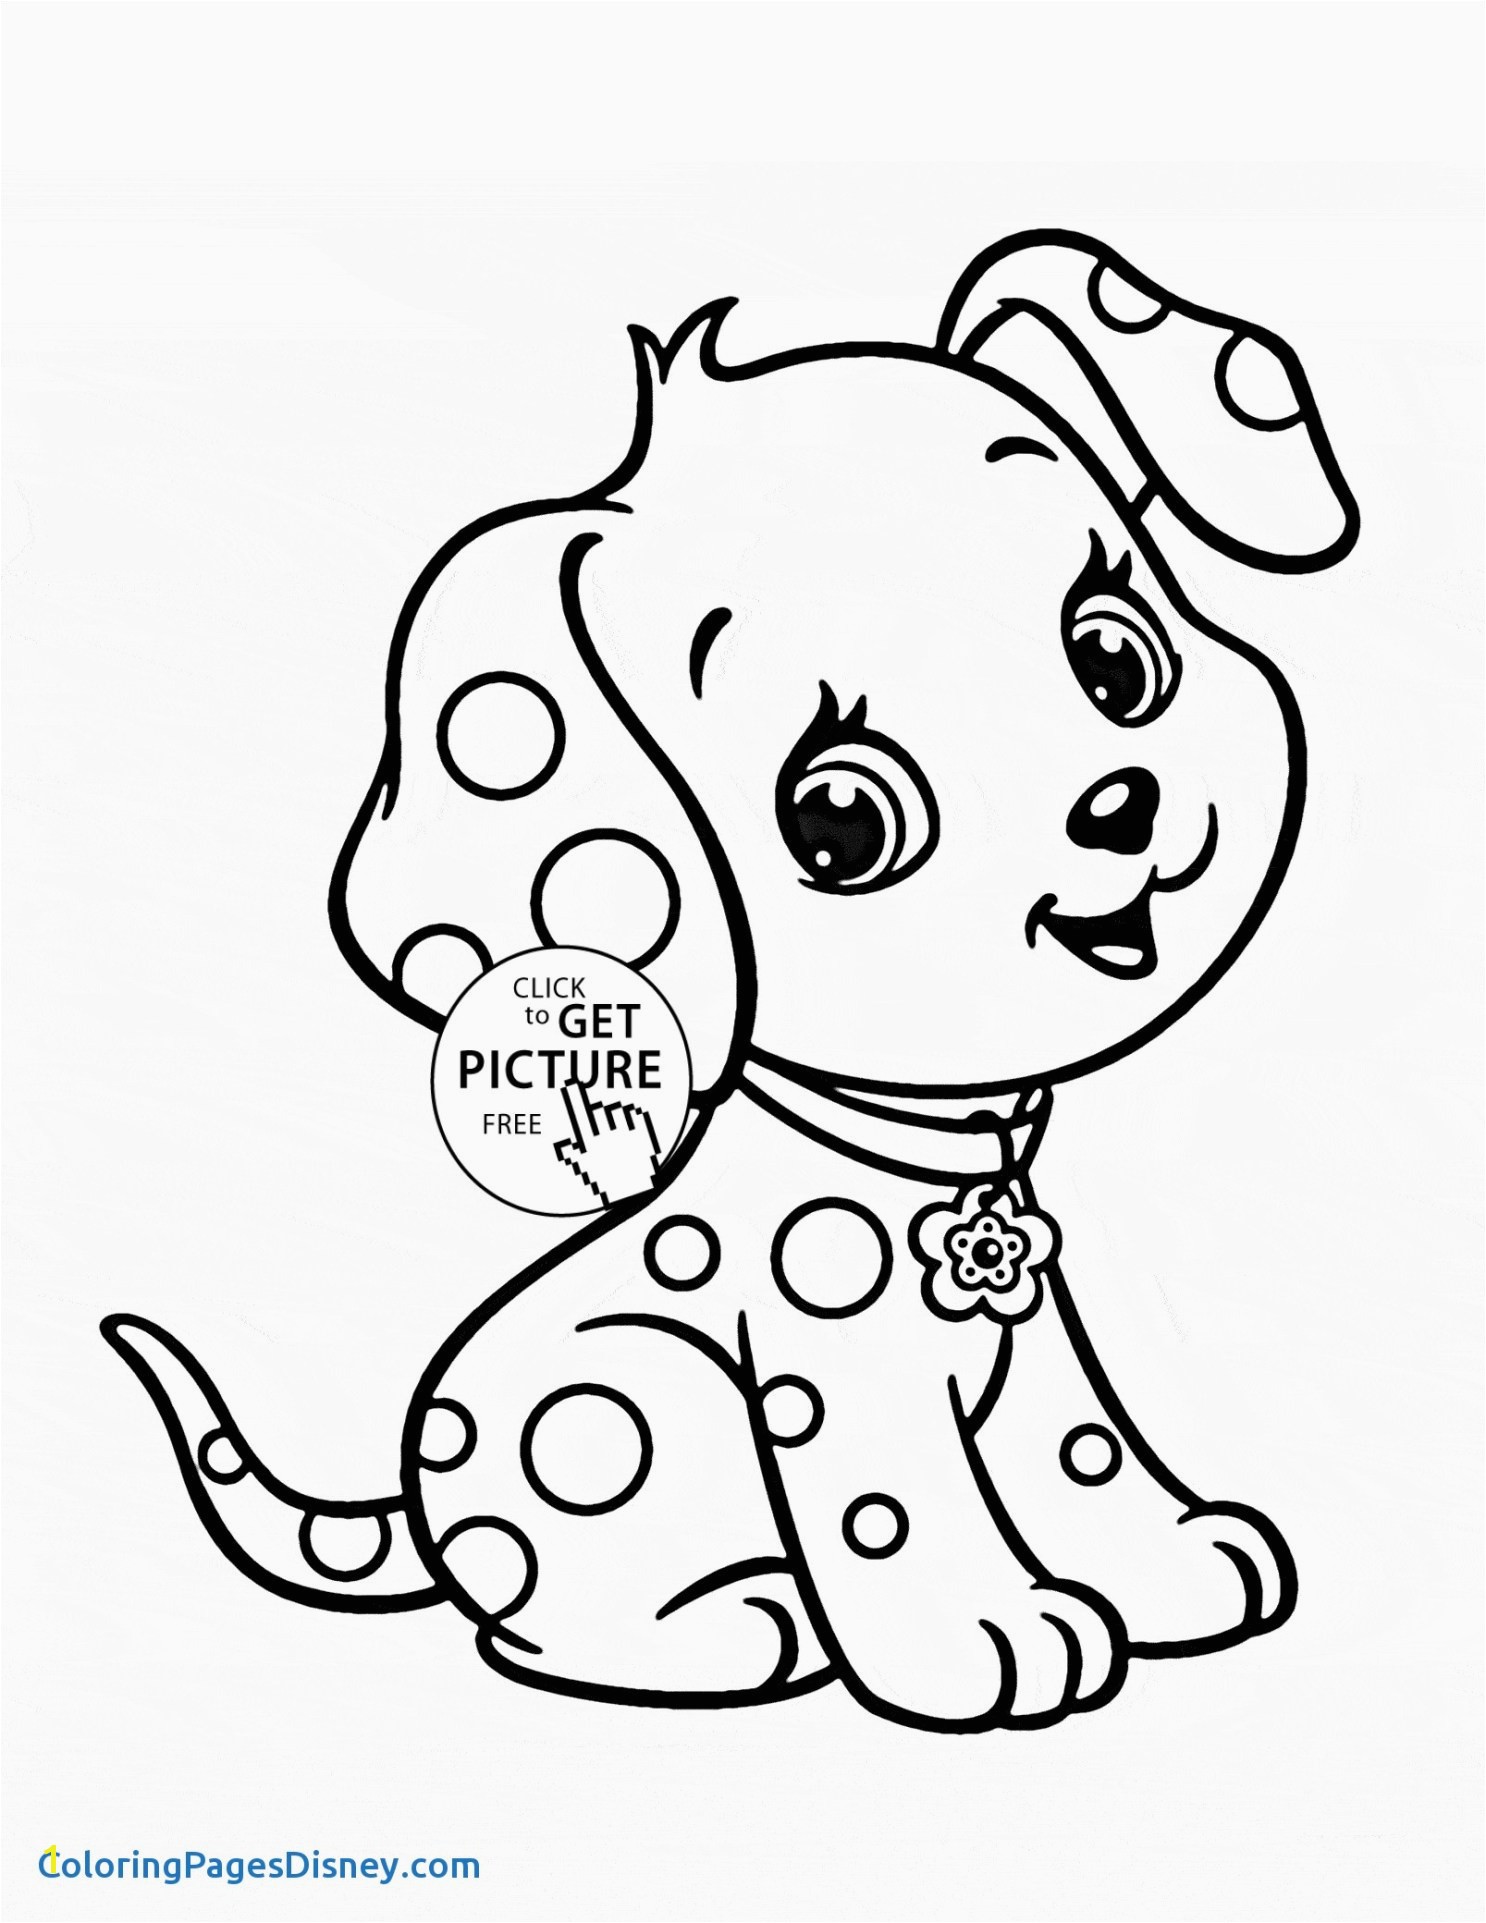 Free Printable Disney Coloring Pages For Kids Printable Coloring Book Disney Luxury Fitnesscoloring Pages 0d